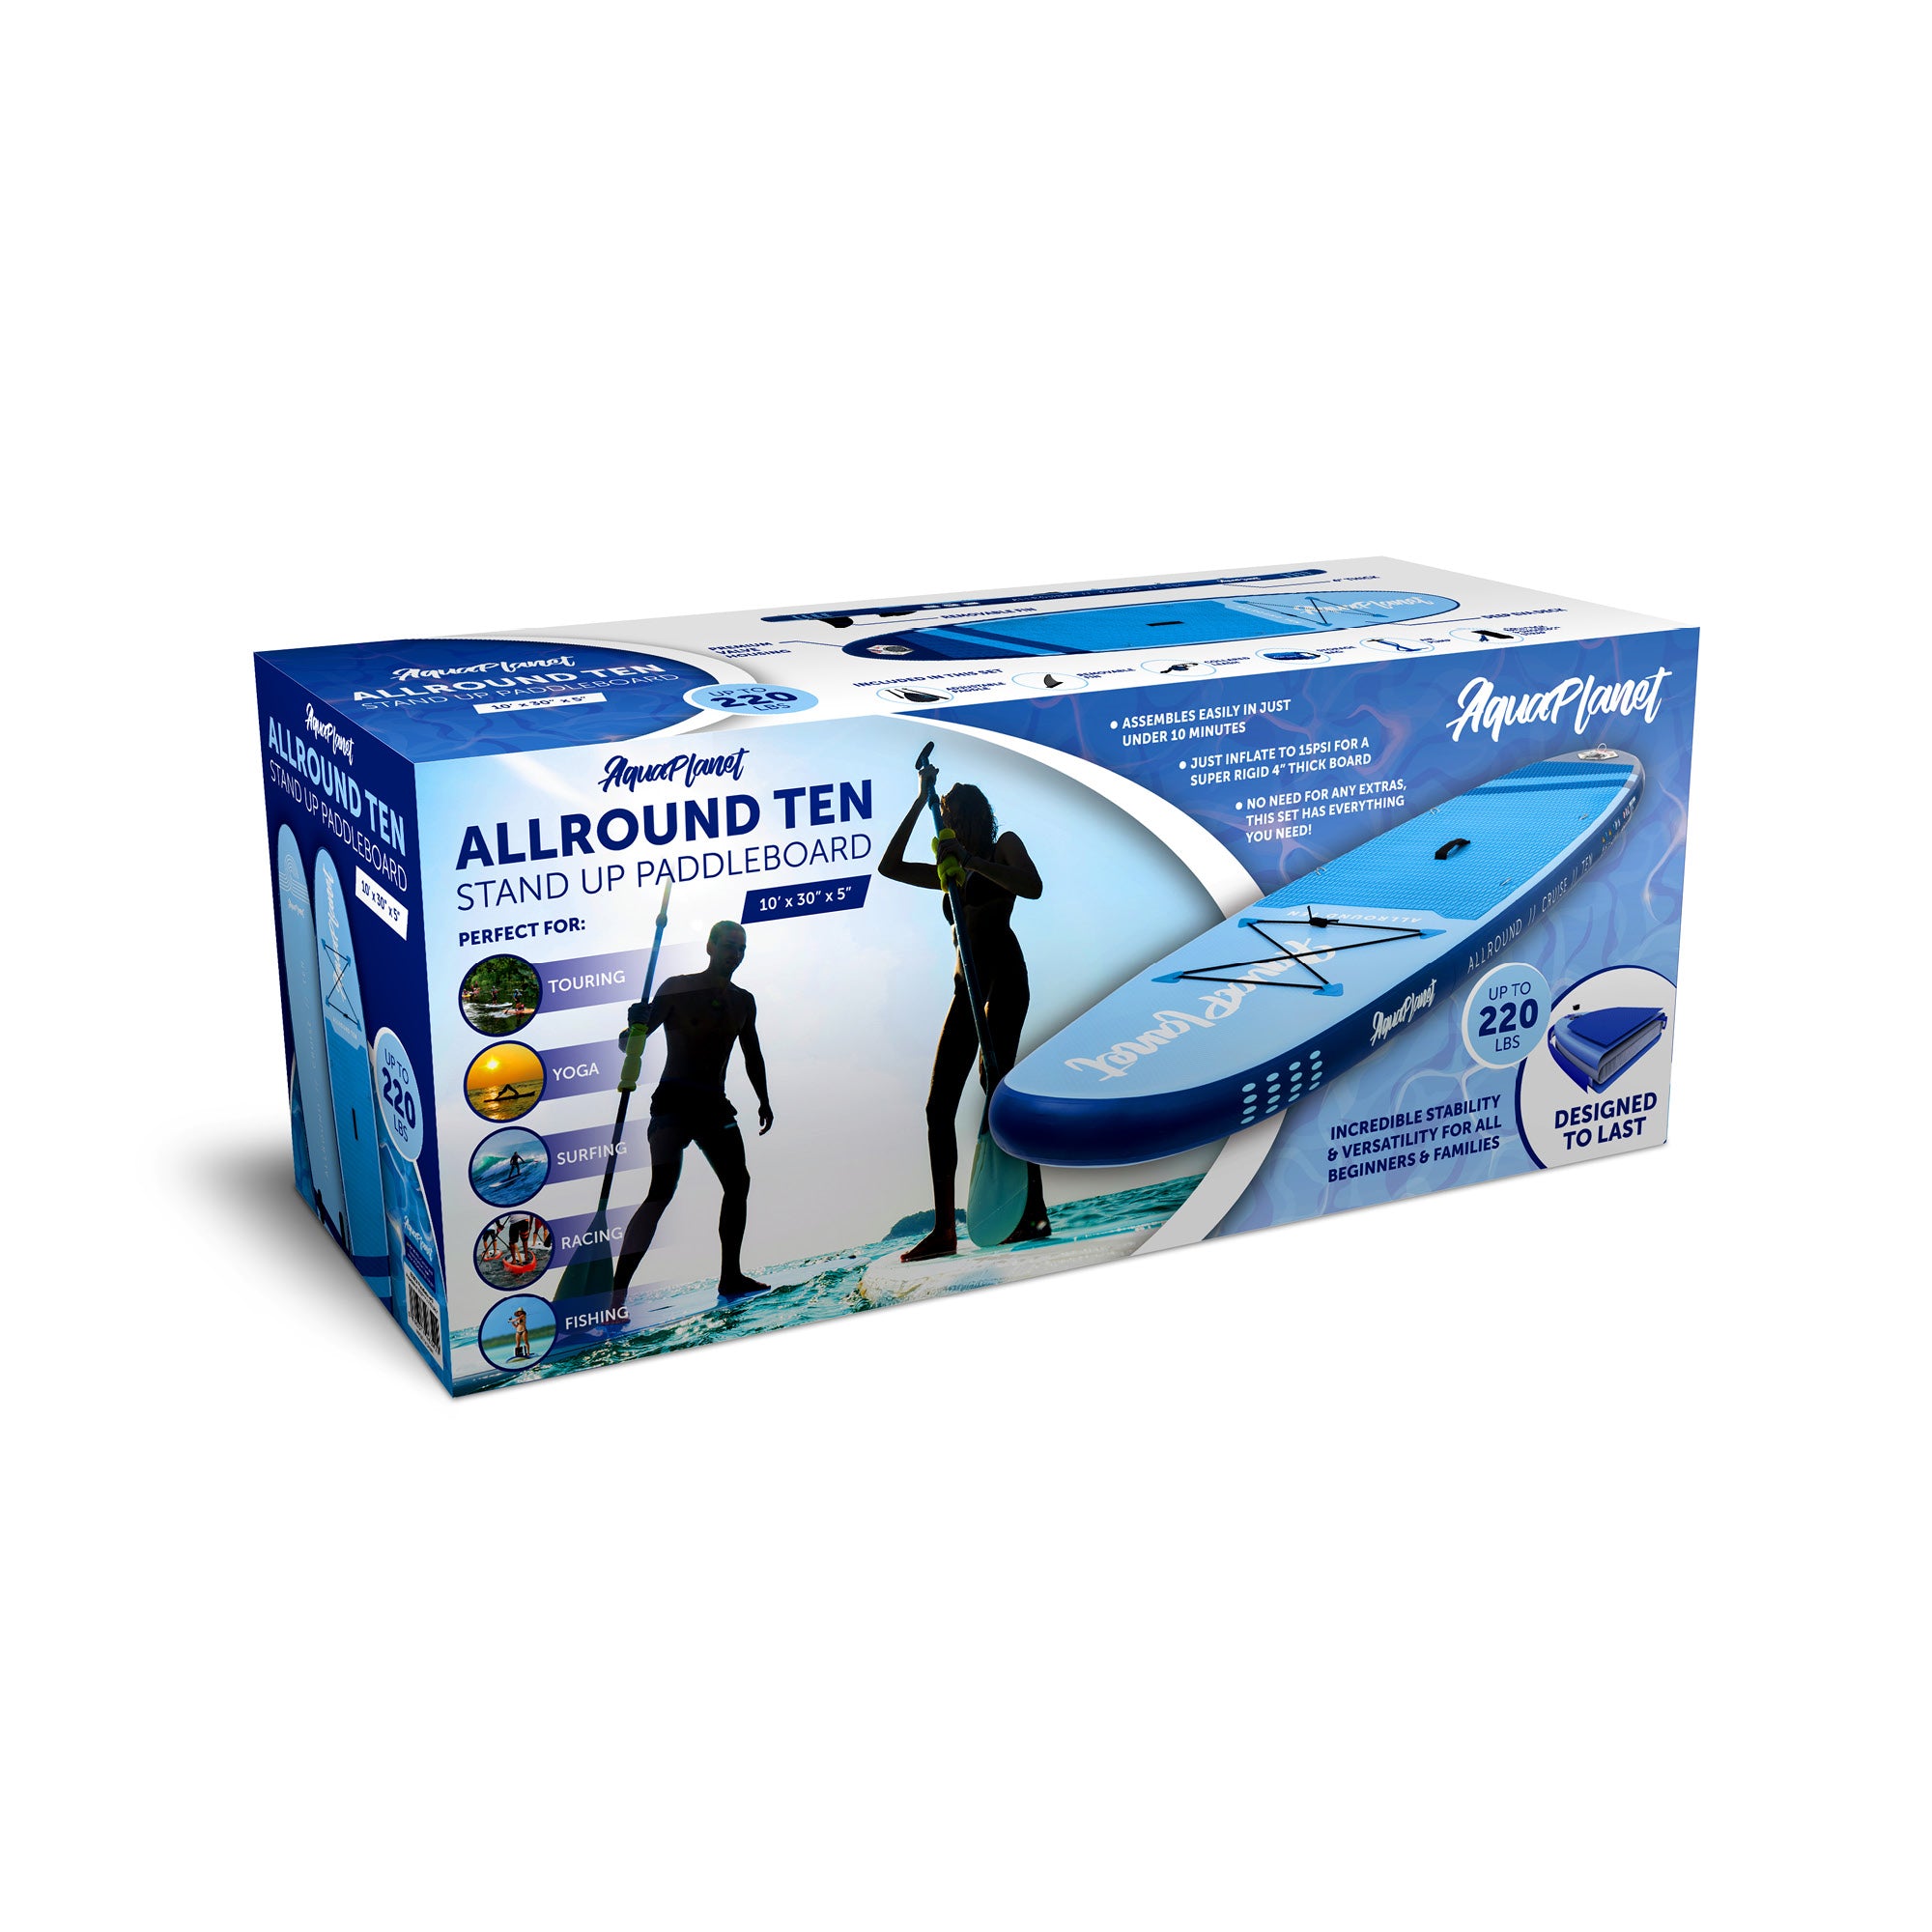 Packaging of the Aquaplanet Allround TEN 10' iSUP Inflatable Stand Up Paddleboard Set - Blue